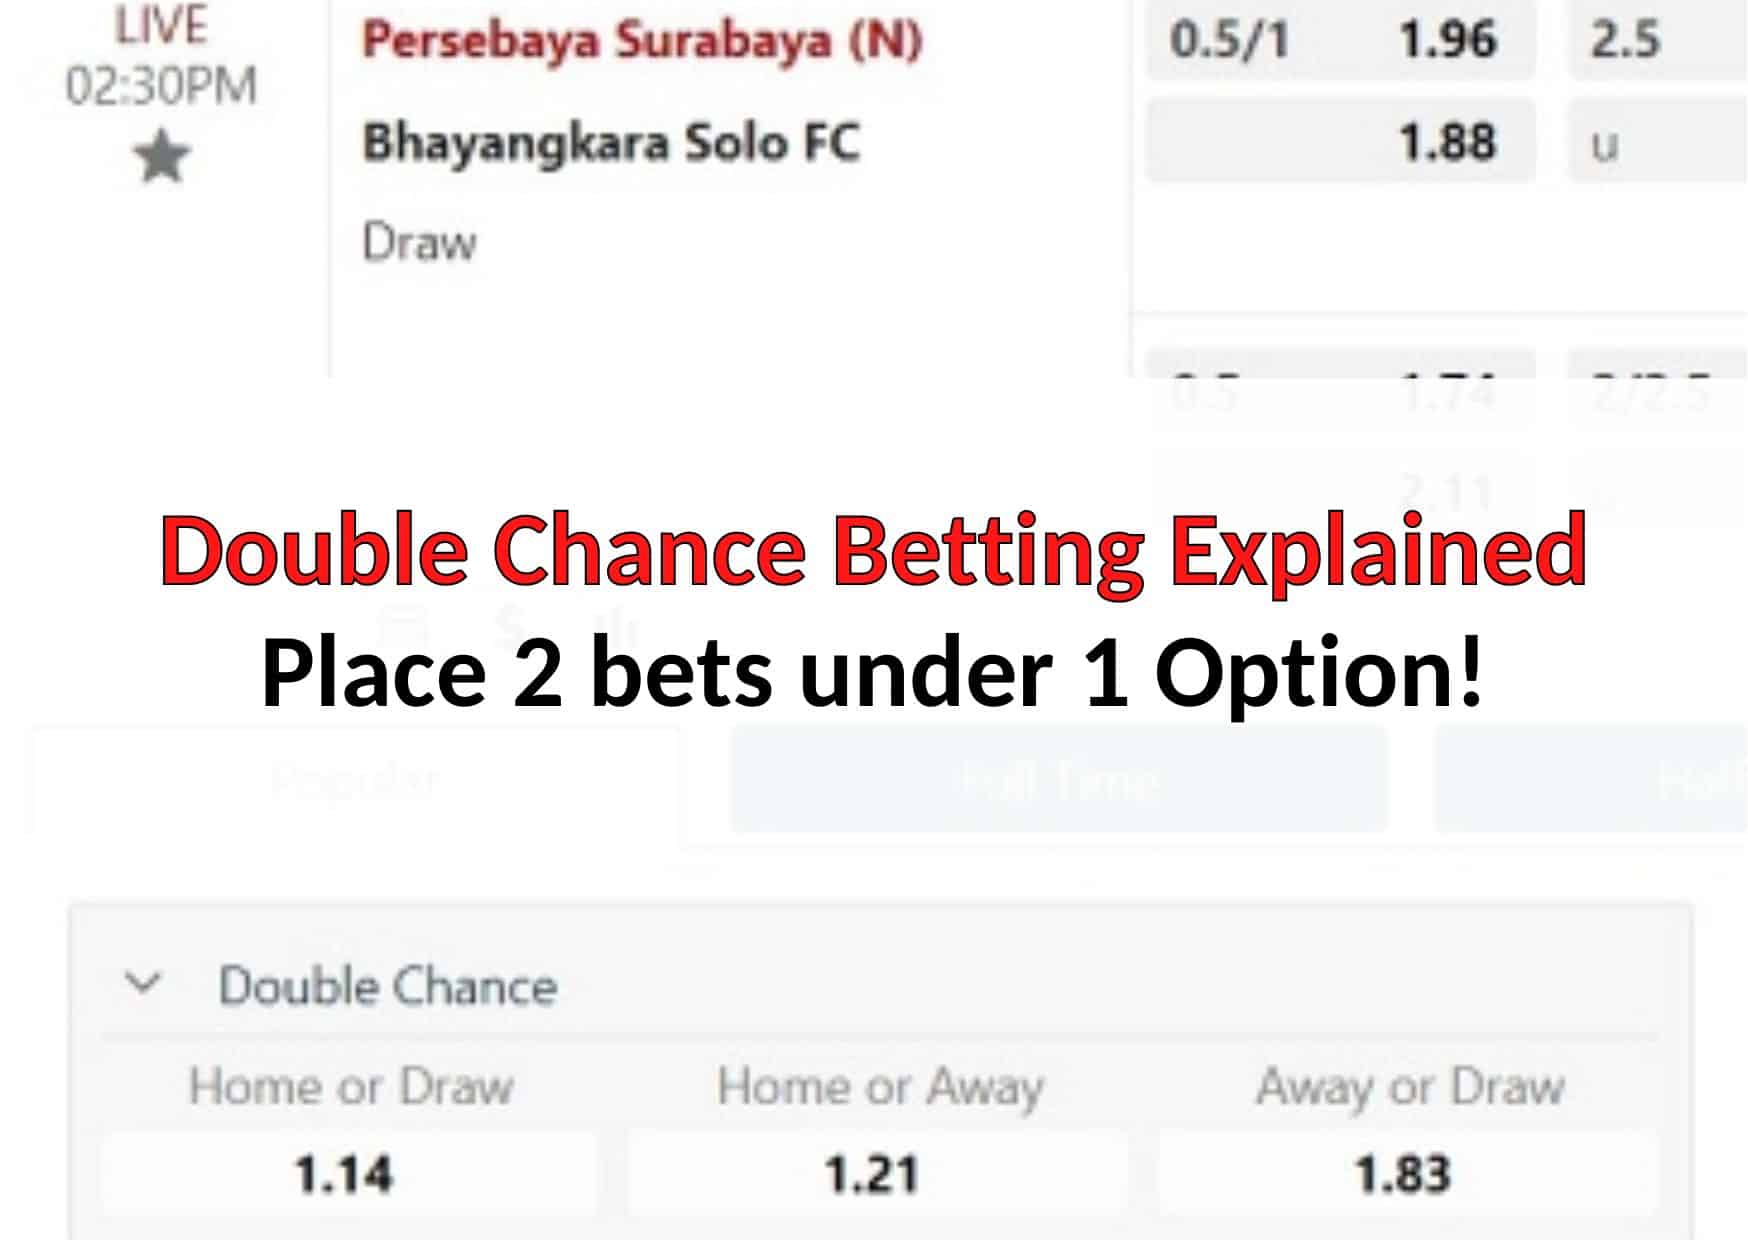 Double Chance Betting Explained: Place 2 bets under 1 Option!